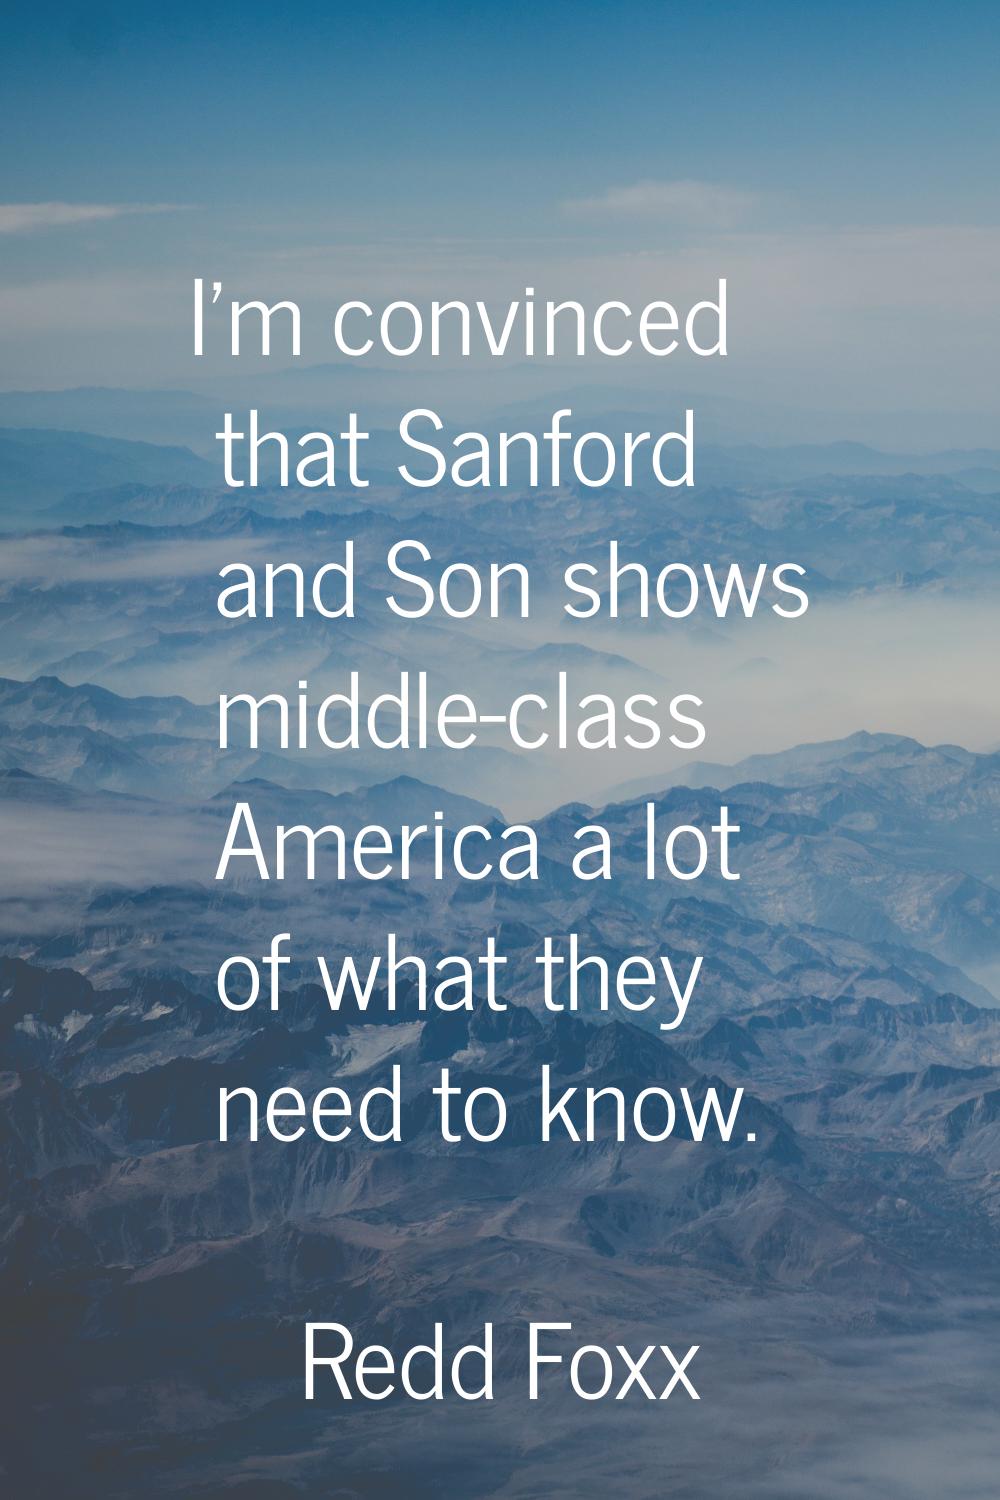 I'm convinced that Sanford and Son shows middle-class America a lot of what they need to know.